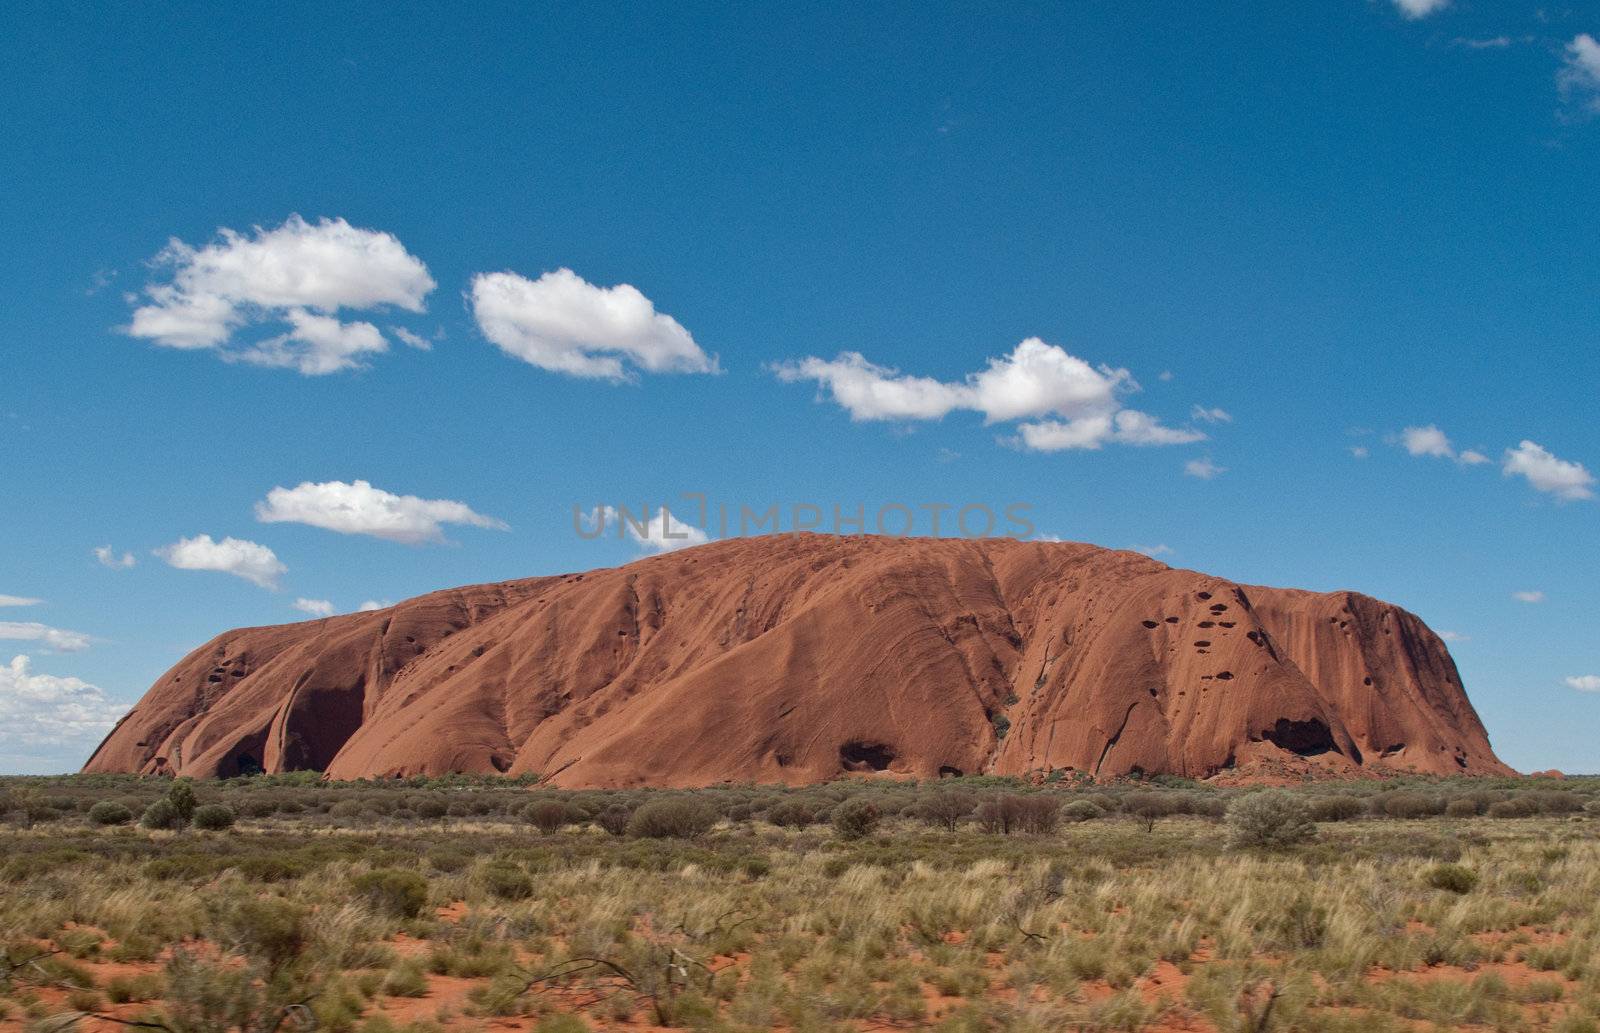 Ayers Rock in Australia in the late afternoon